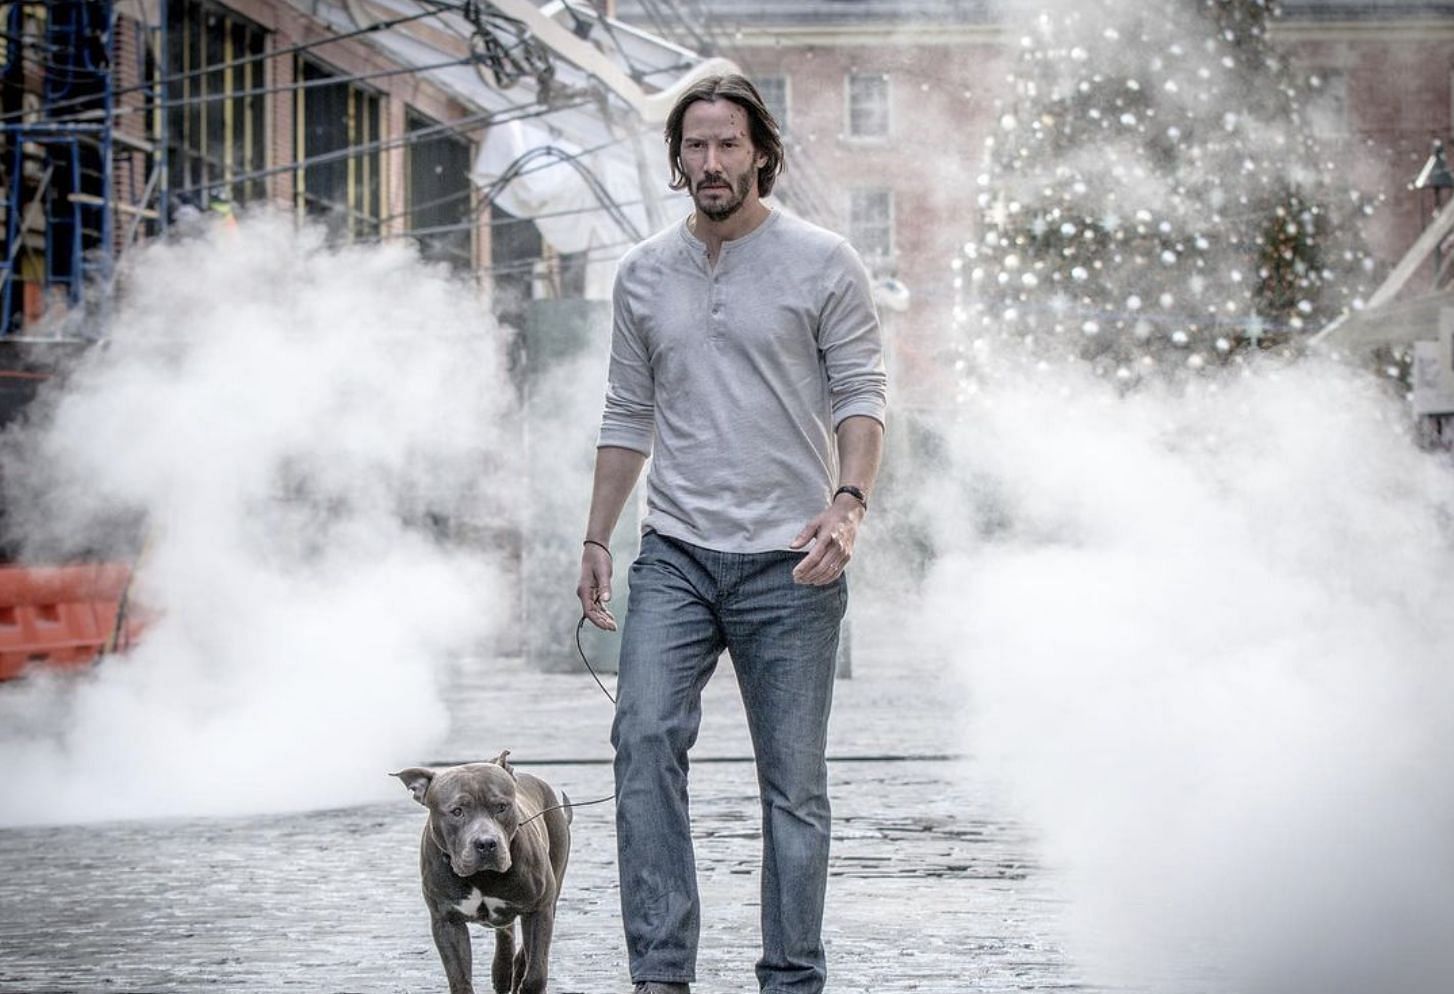 A still of Keanu Reeves who plays Wick. (Image via Instagram/@lionsgate)